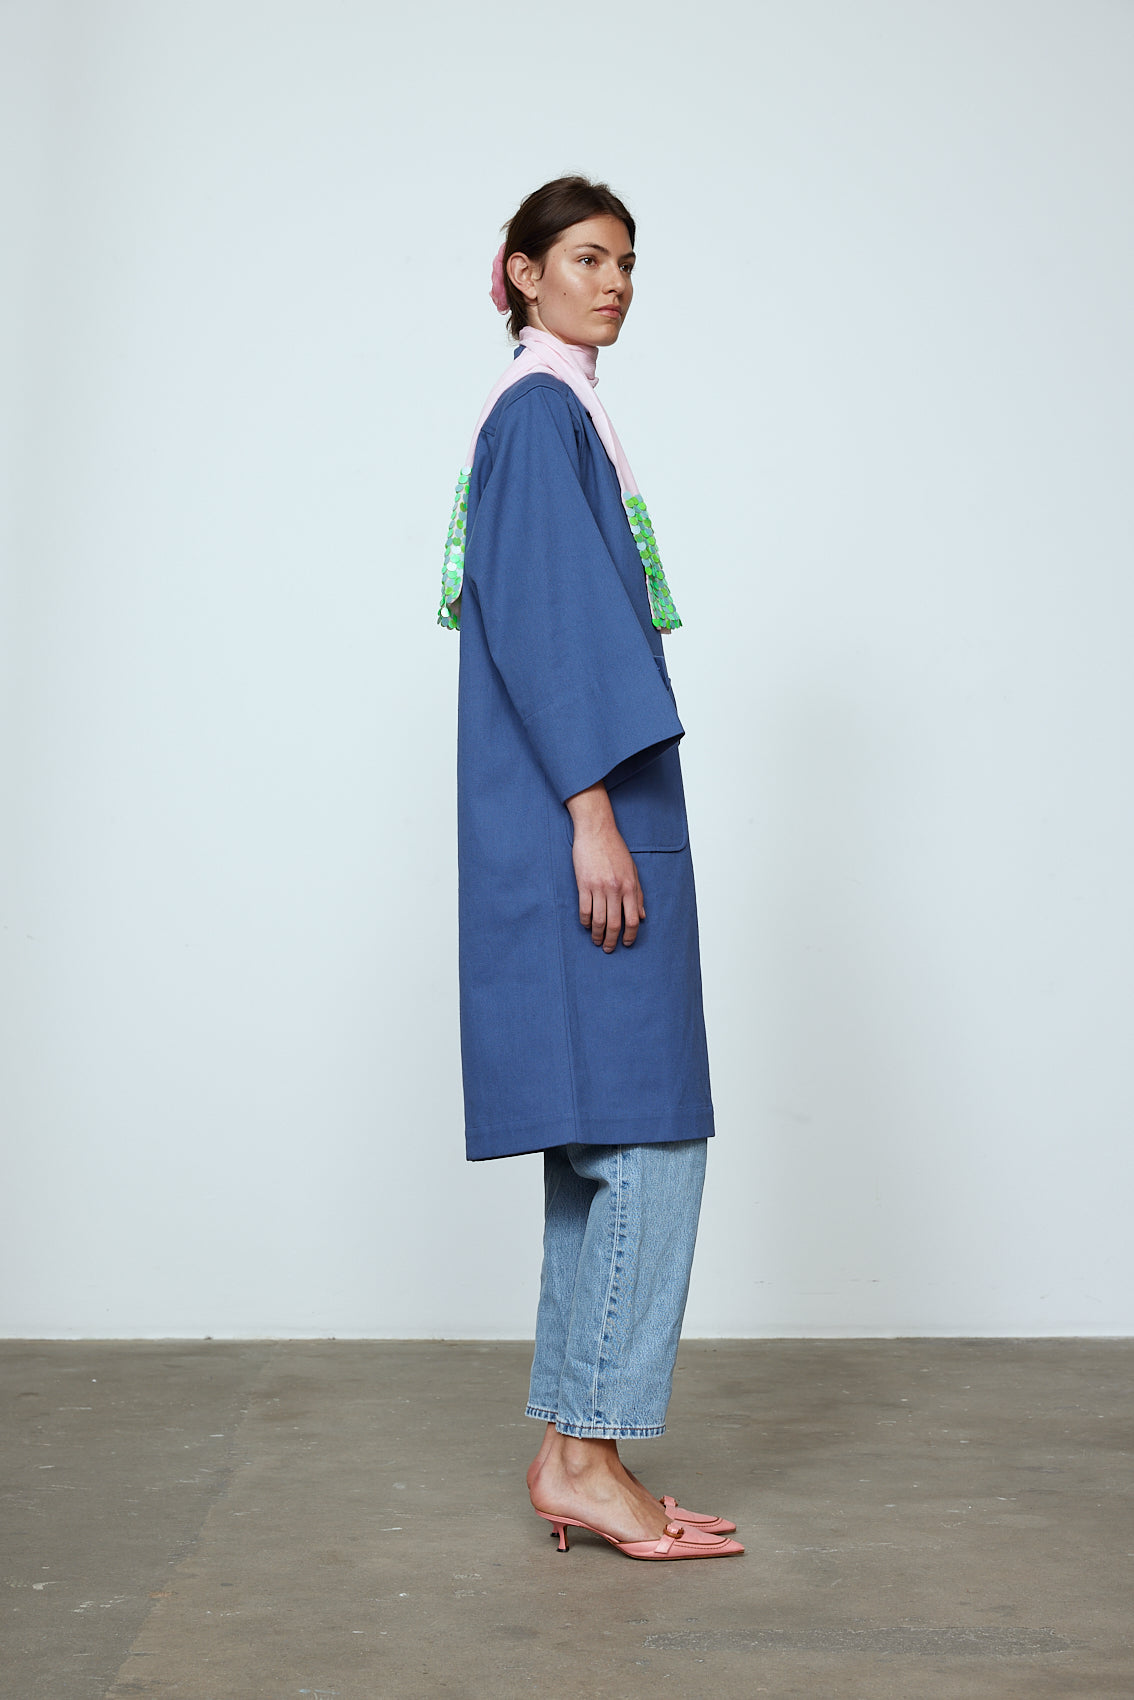 The Anna Coat in French Blue Canvas. The jacket is inspired by vintage work-wear with wide sleeves, cuffs, and button closing on the front.  Material: 100% cotton.